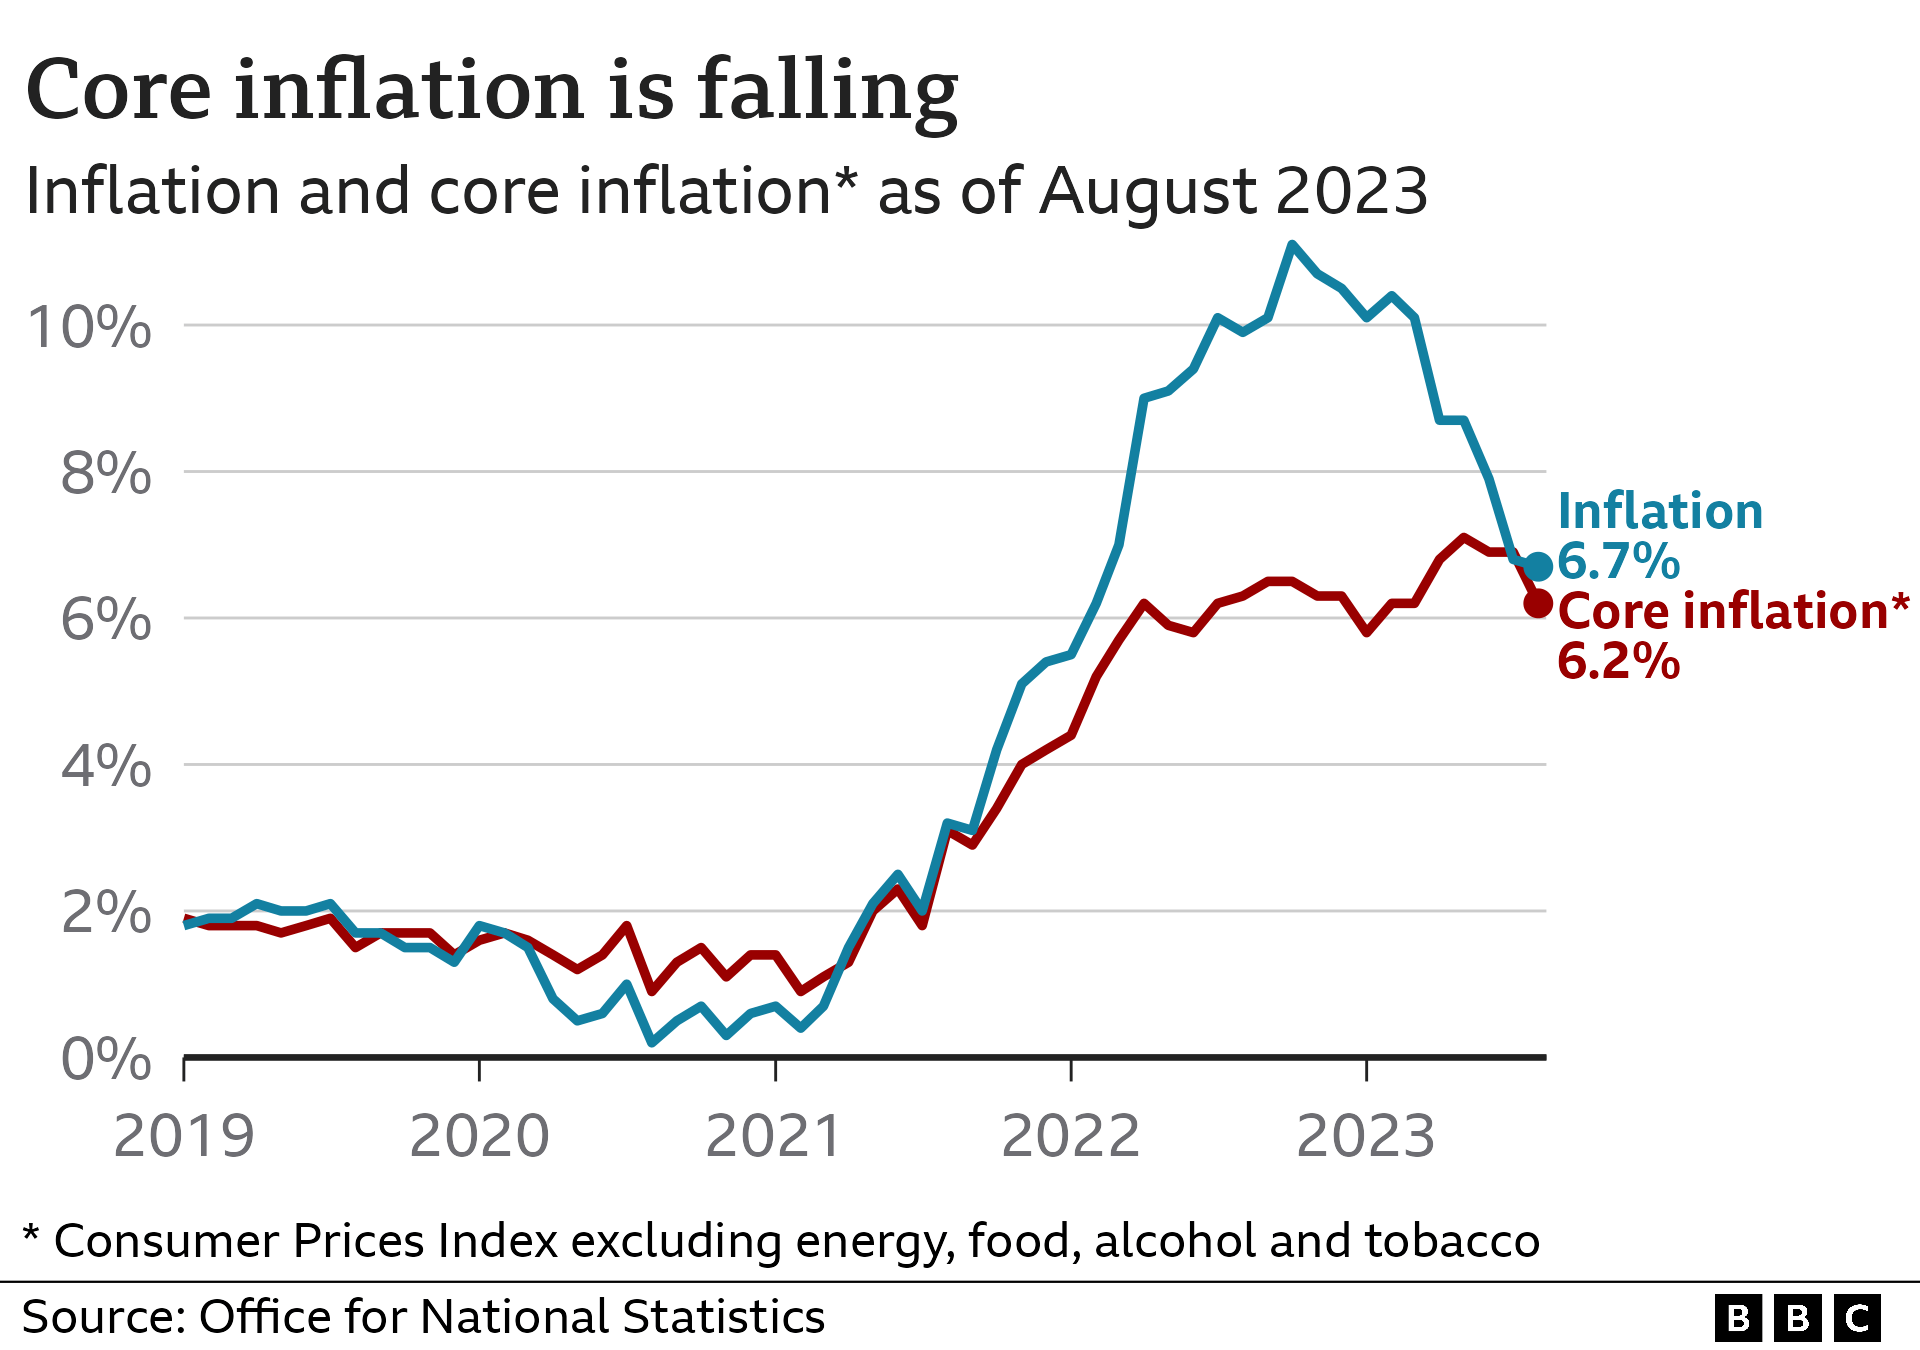 Line chart showing inflation, as well as core inflation, which excludes energy, food, alcohol and tobacco. Both are trending down.